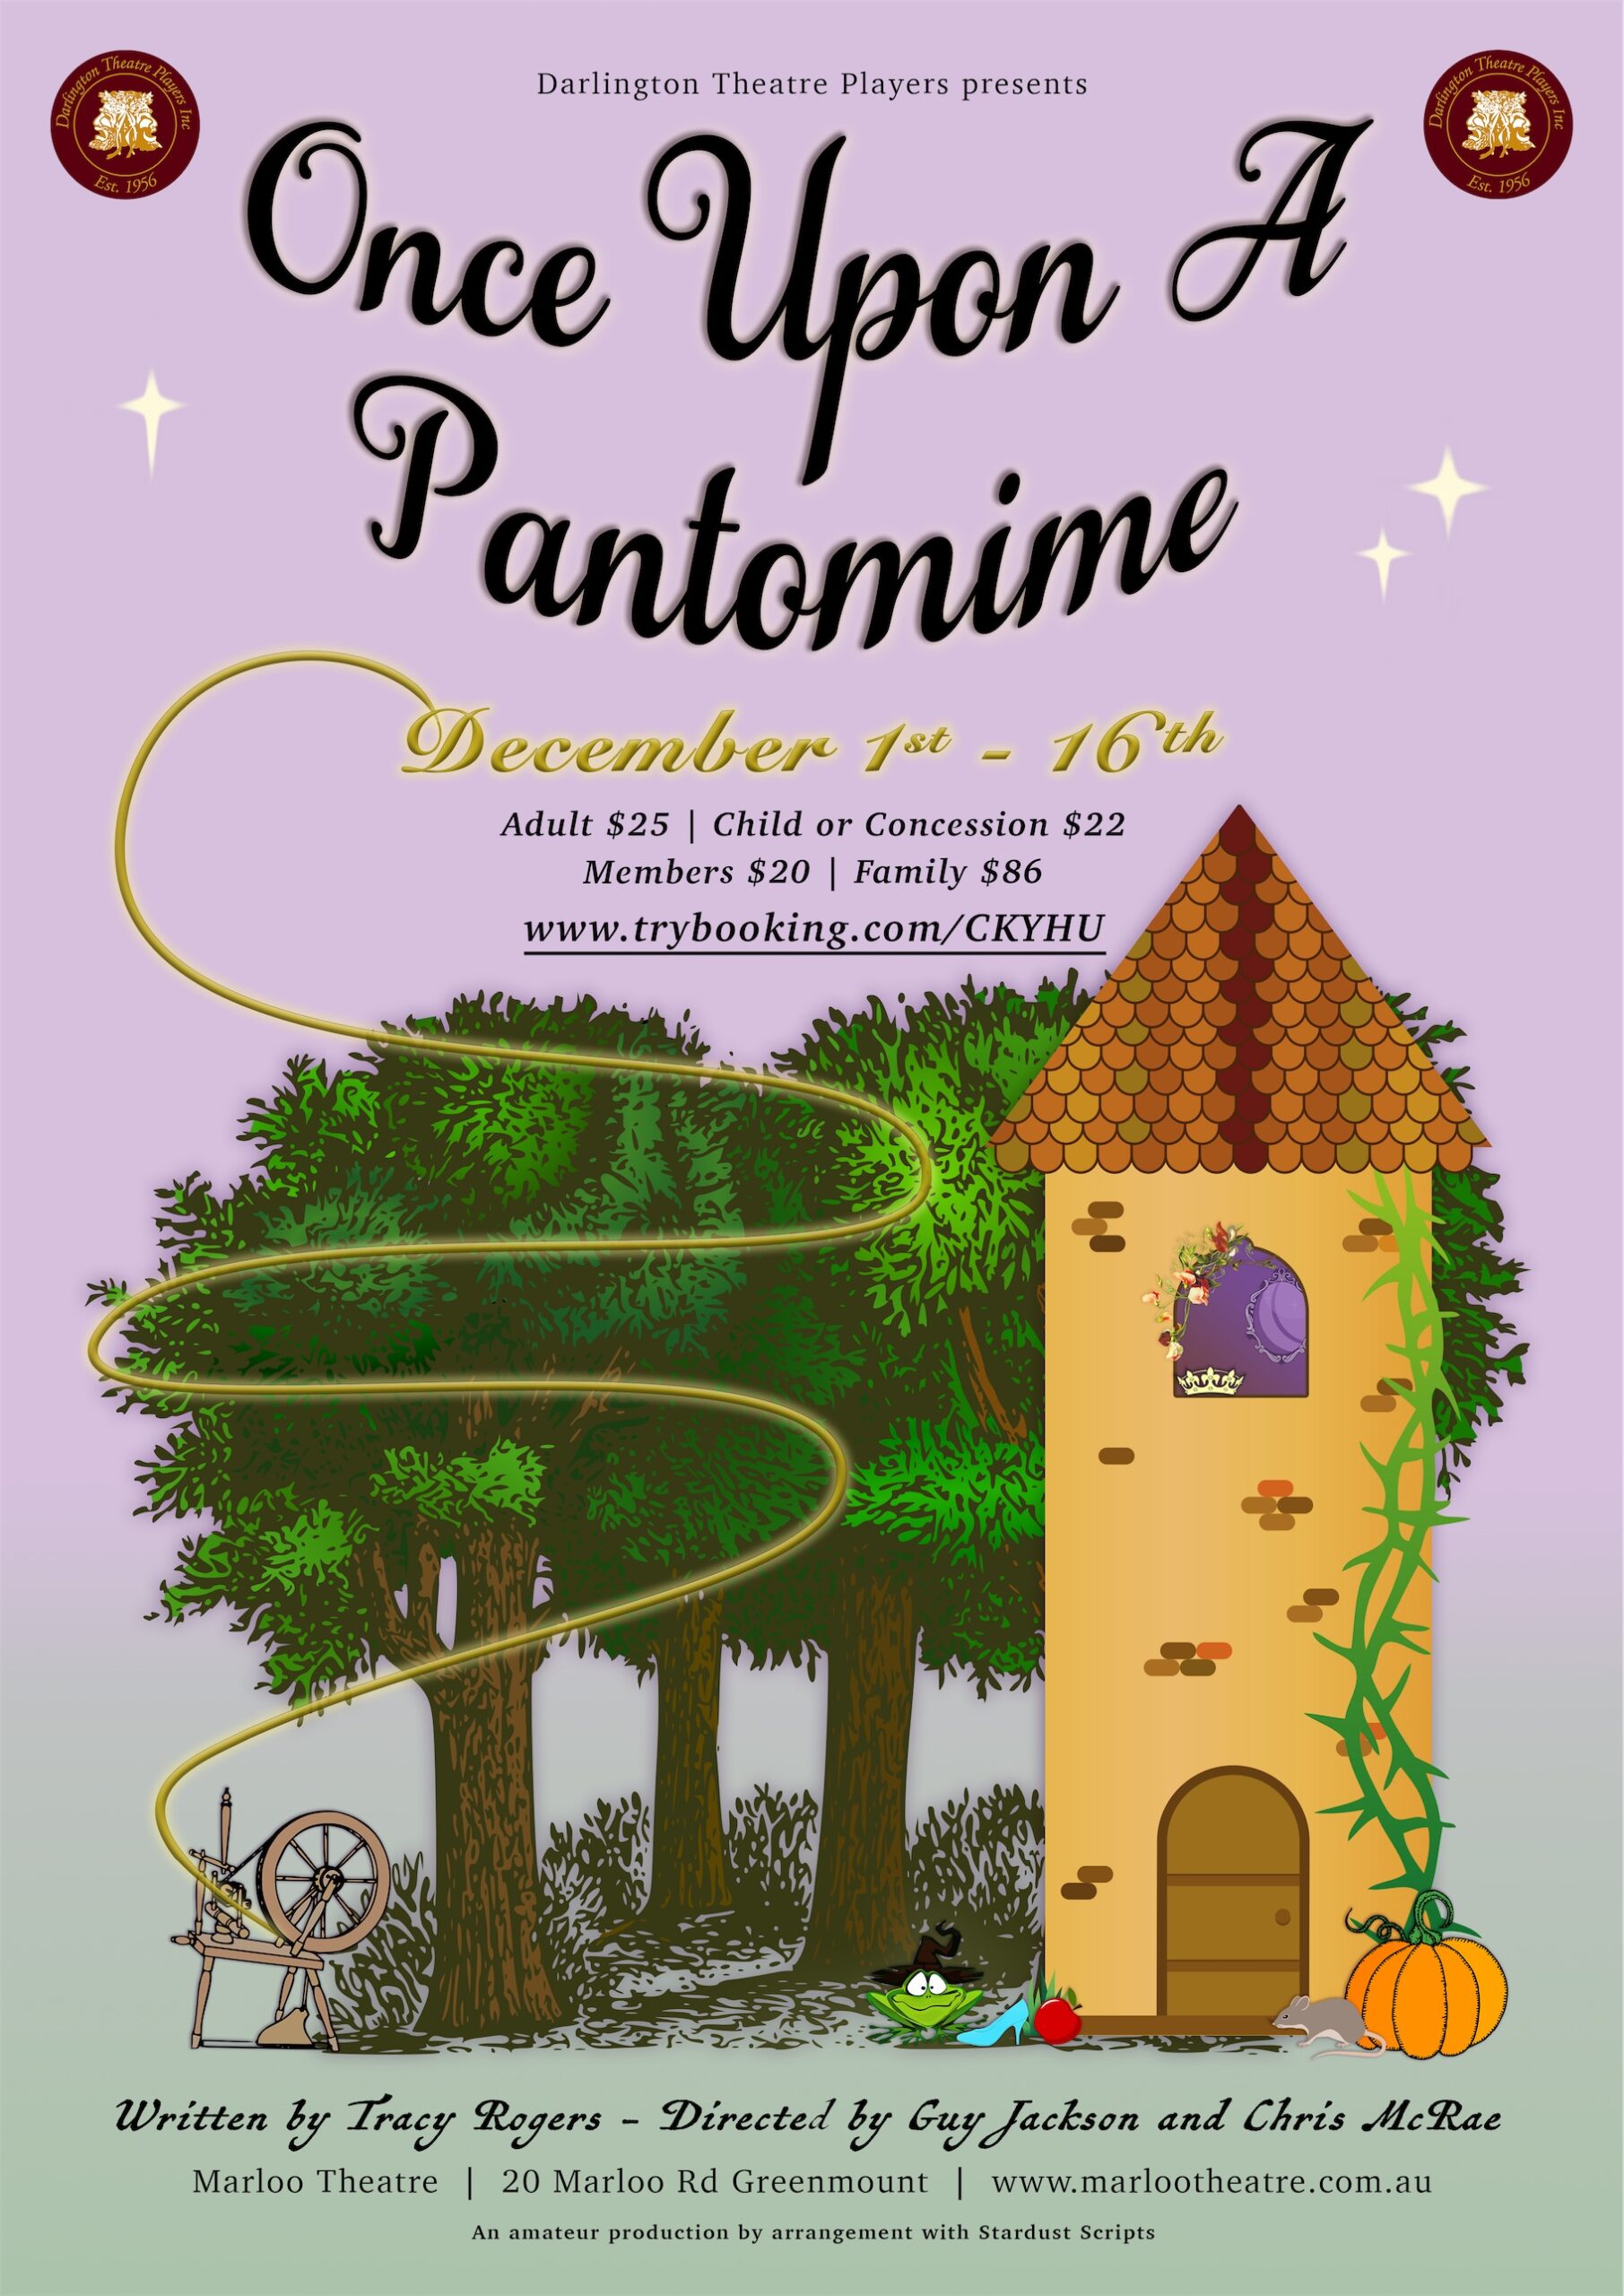 Once Upon A Pantomime